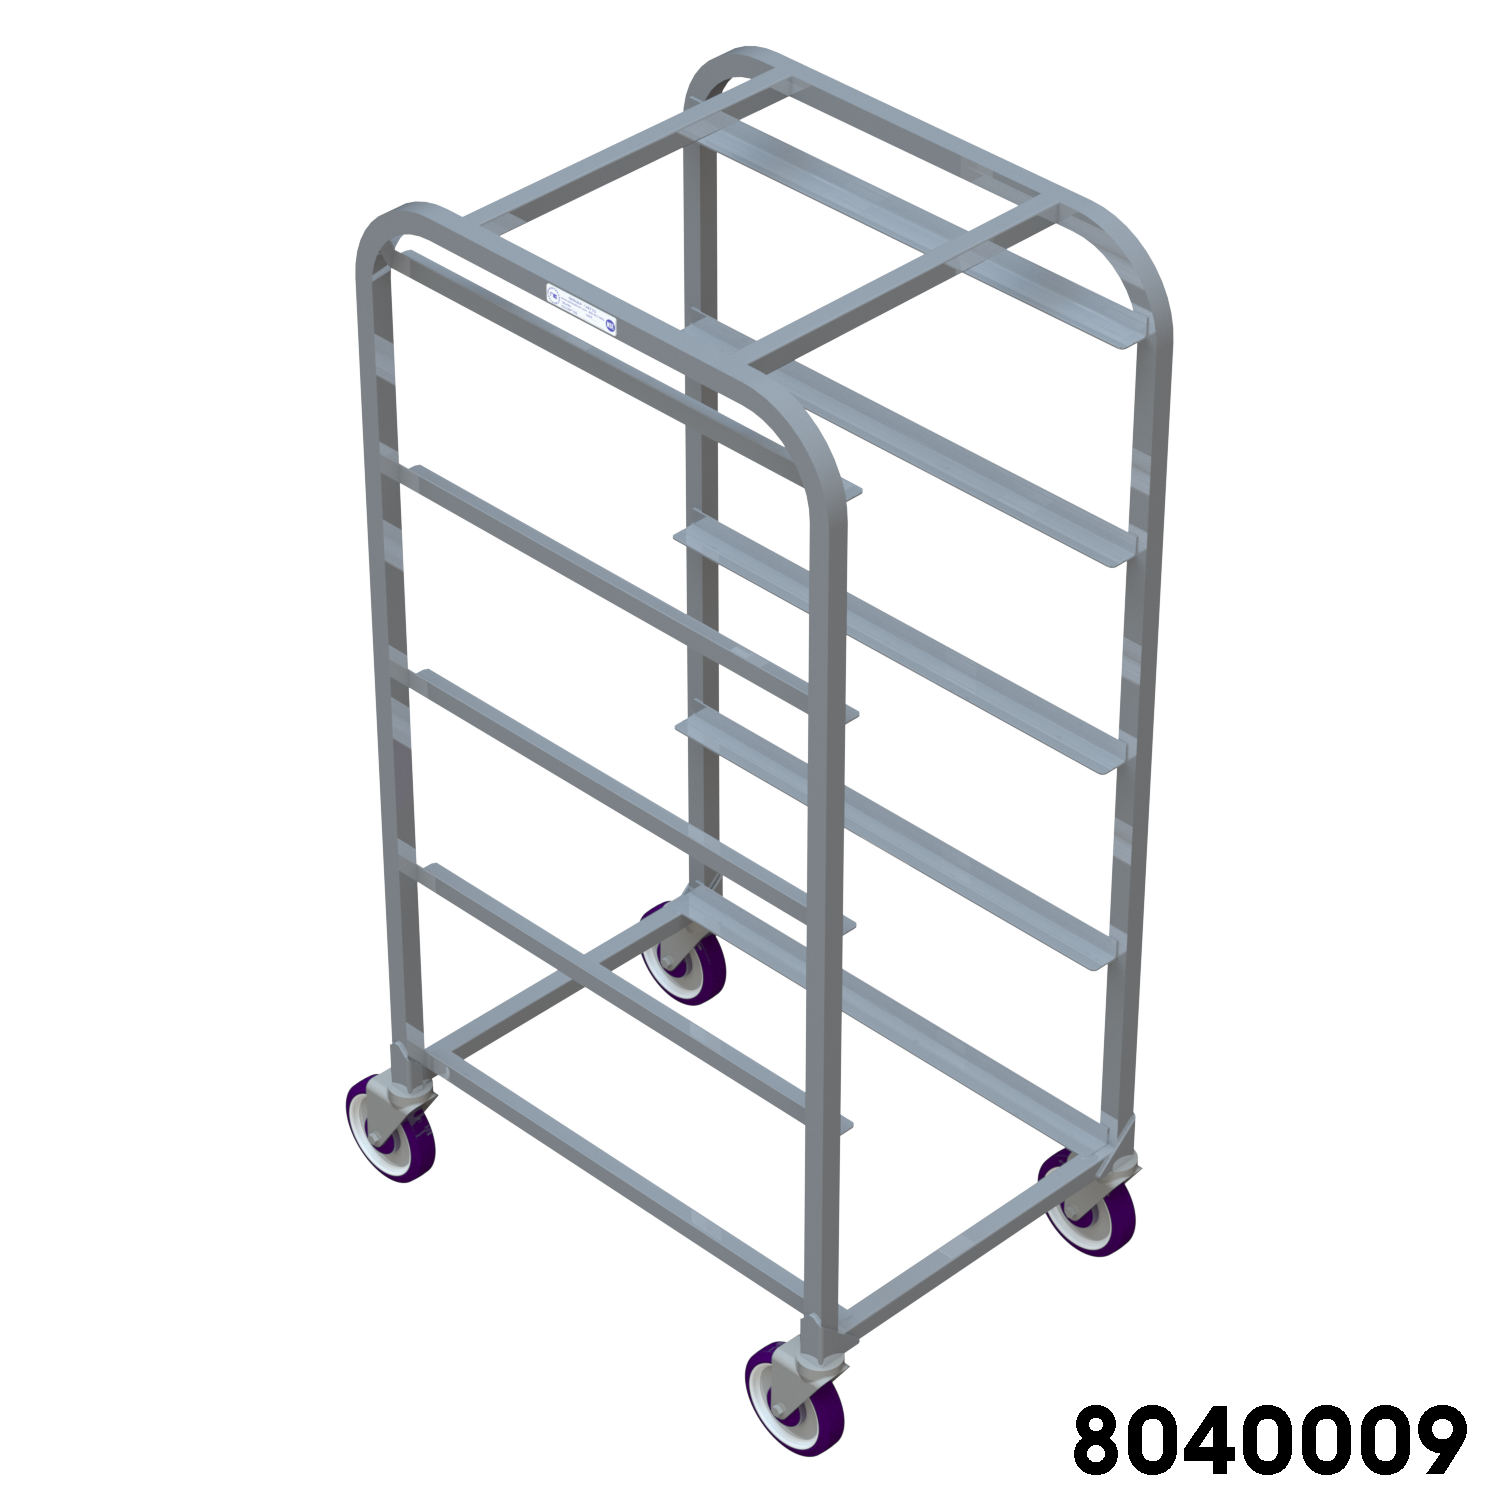 Built to last. Sanitary square aluminum tube with heavy gauge aluminum angle runners. nest dollies industrial cart nesting picking cart NSF cart NSF rack NSF approved NSF certified National Sanitation Foundation tray shelf Distribution Cart picking cart tray shelf picking cart, picking cart, ecom cart, ecommerce cart, ecommerce picking cart, picking cart, INDUSTRIAL CARTS, grocery cart grocery picking cart, department store cart, beverage cart NSF approved. This food service cart meets strict standards and procedures imposed by NSF. lug cart meat department, produce department